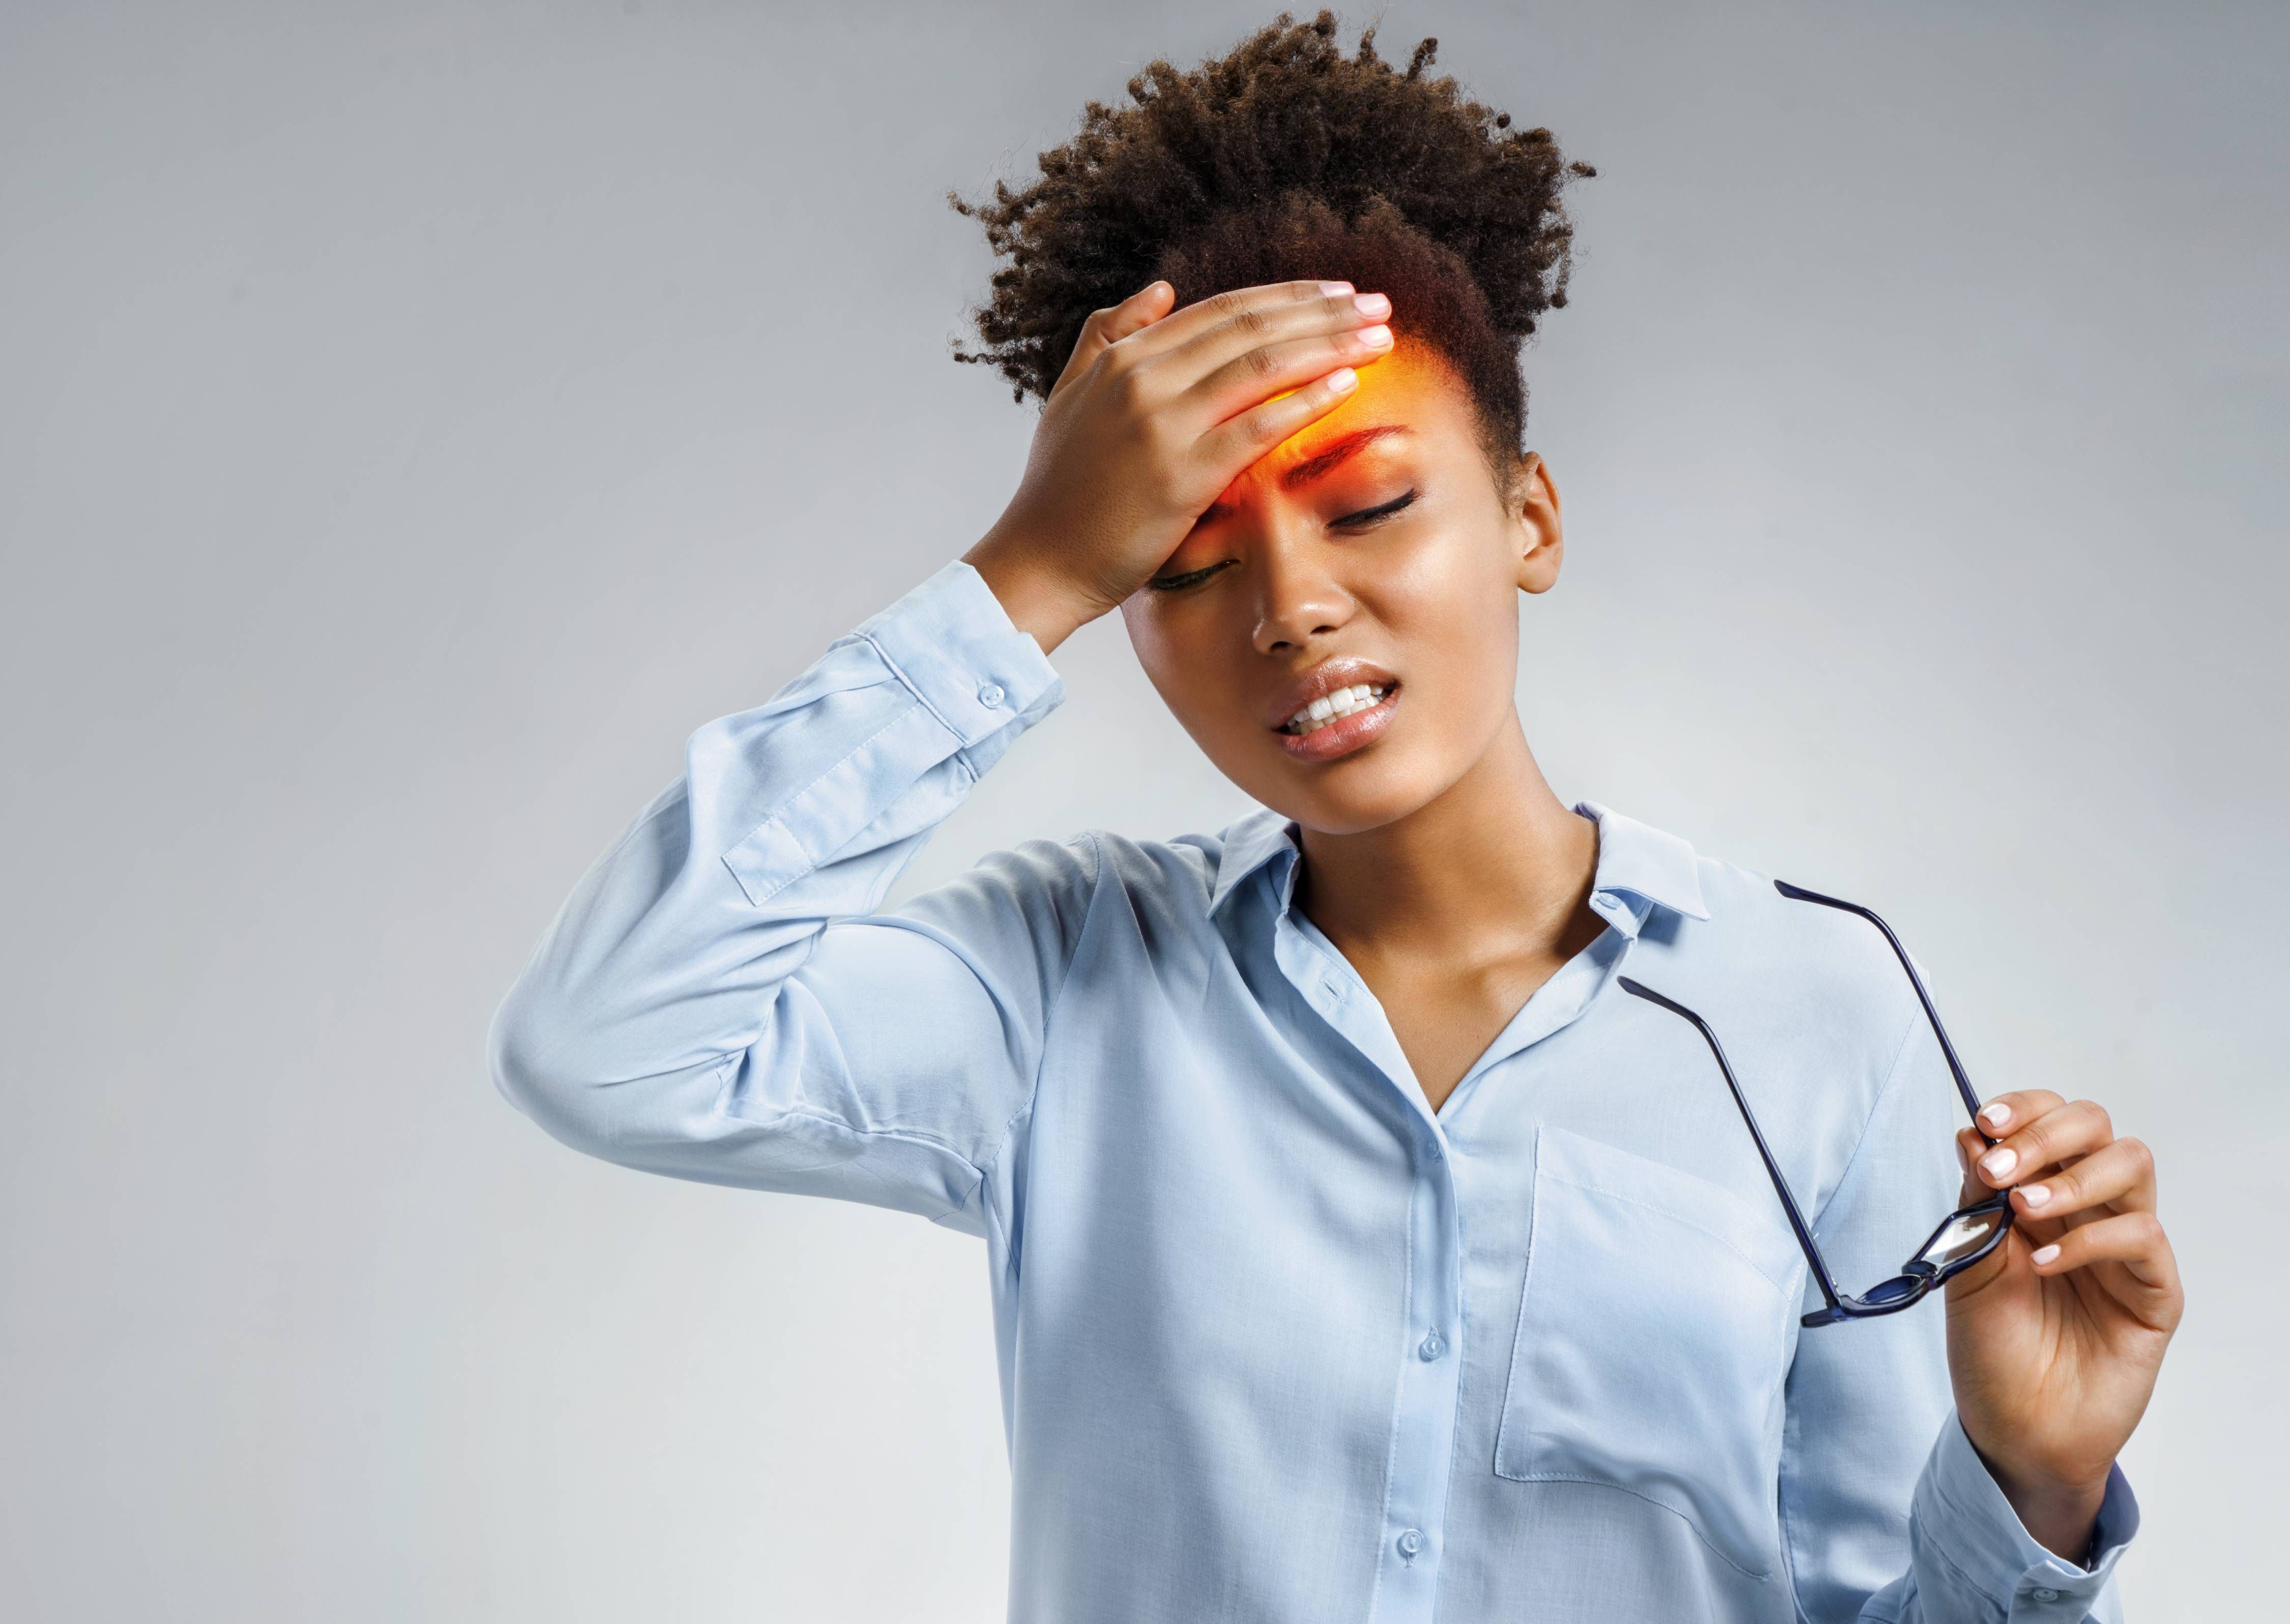 Top Ways Chiropractic Care Can Help Manage Headaches